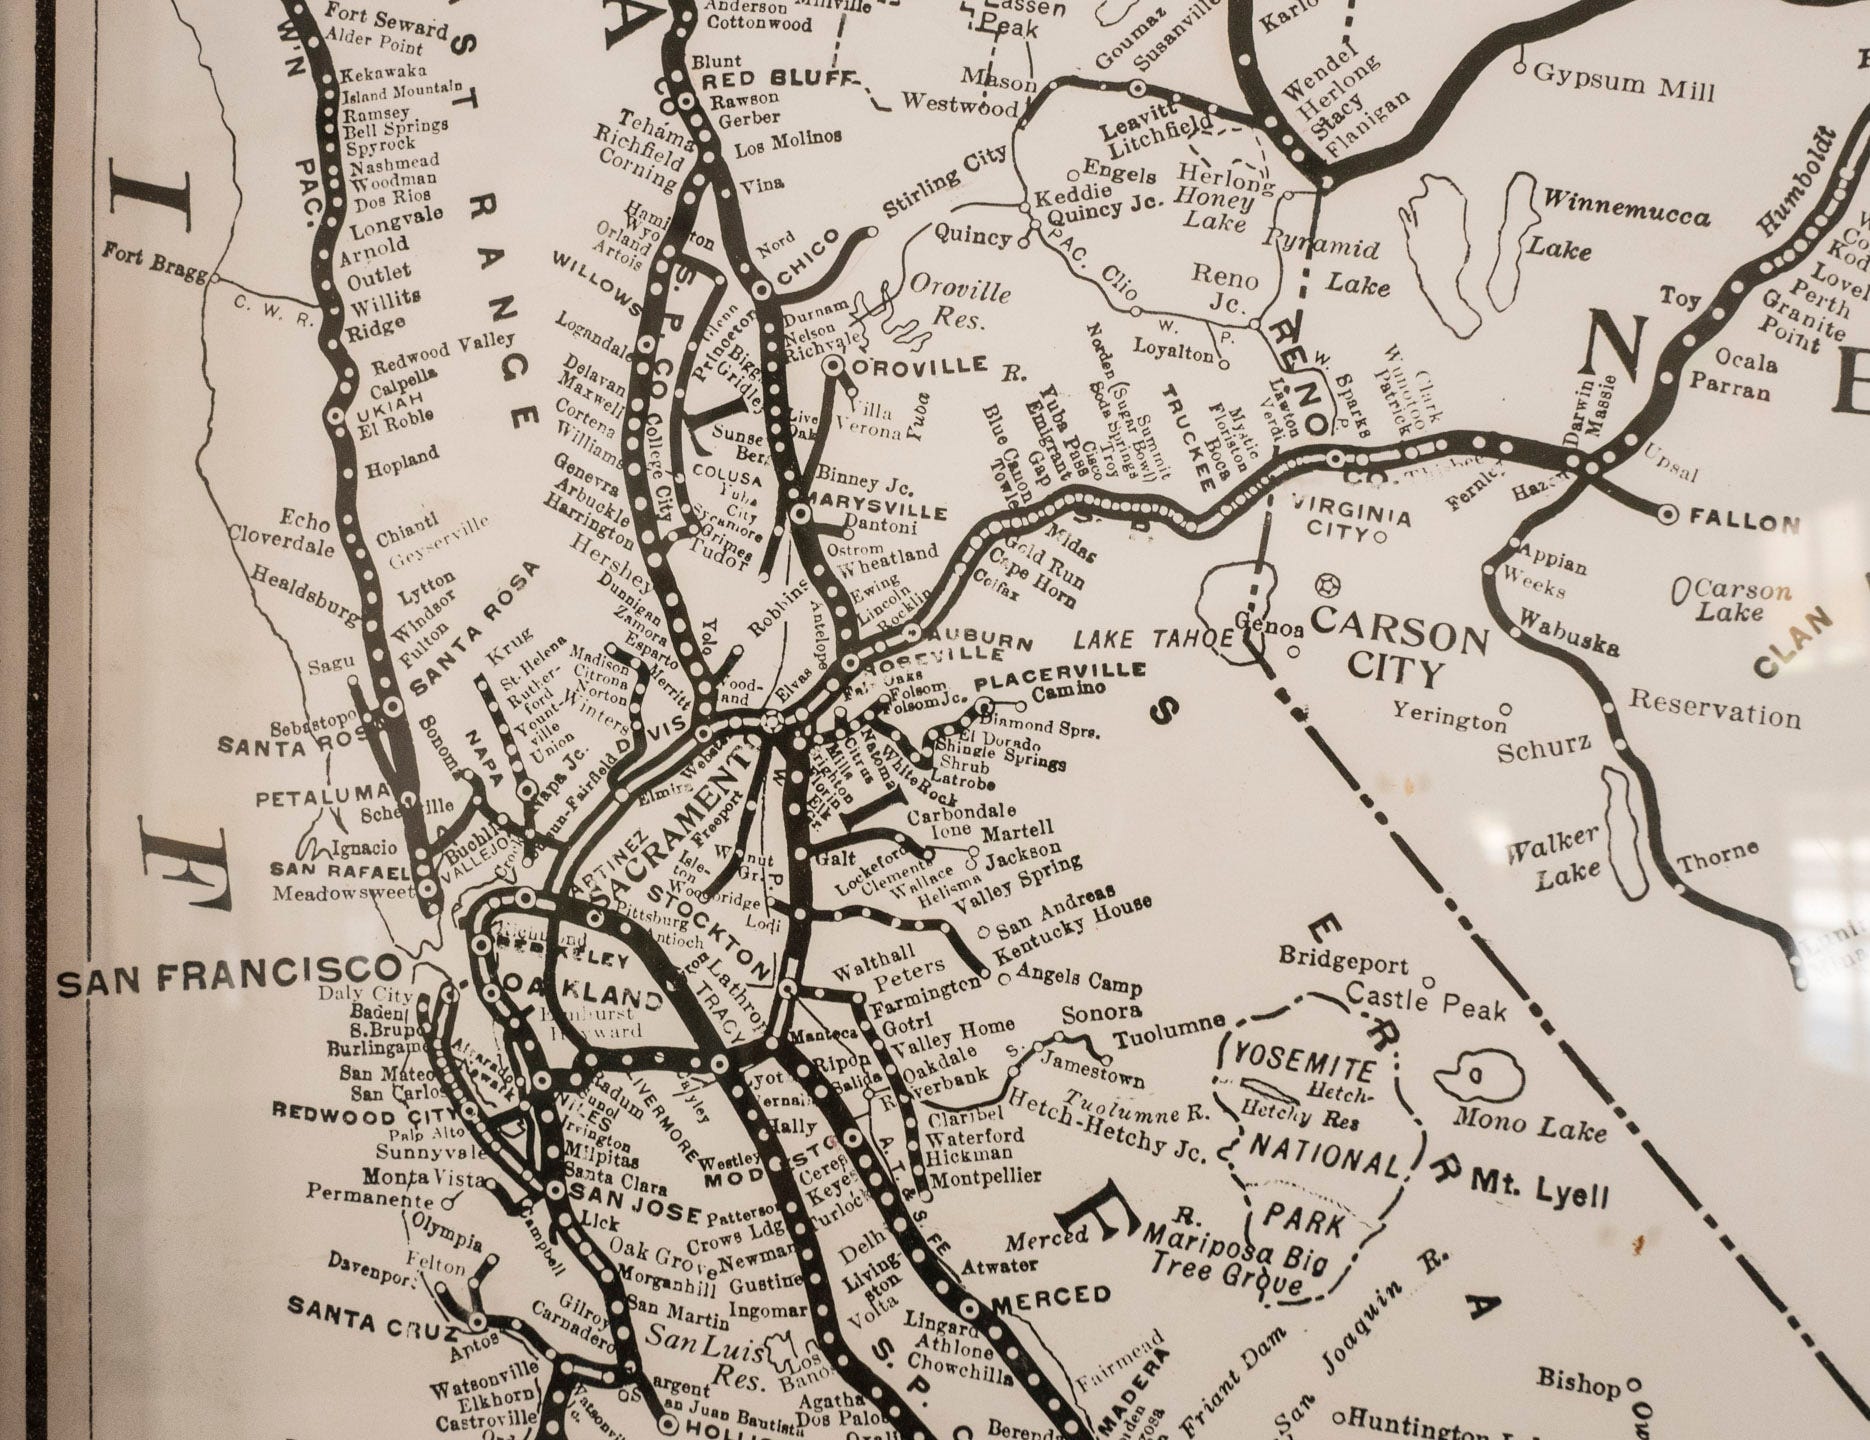 Old railroad map with thick lines depicting railroad tracks and dots representing each railroad station. It is a simple, hand-drawn map of Northern California, including San Francisco, San Jose, and Santa Cruz (among others) to the south, stations as for north as Fort Seward, and to the east the western half of Nevada, including Reno, Carson City, Fallon, and others. The primary geographic references on the map are lakes - Taho, Mono, Walker, and others. Yosemite National Park is outlined as well.